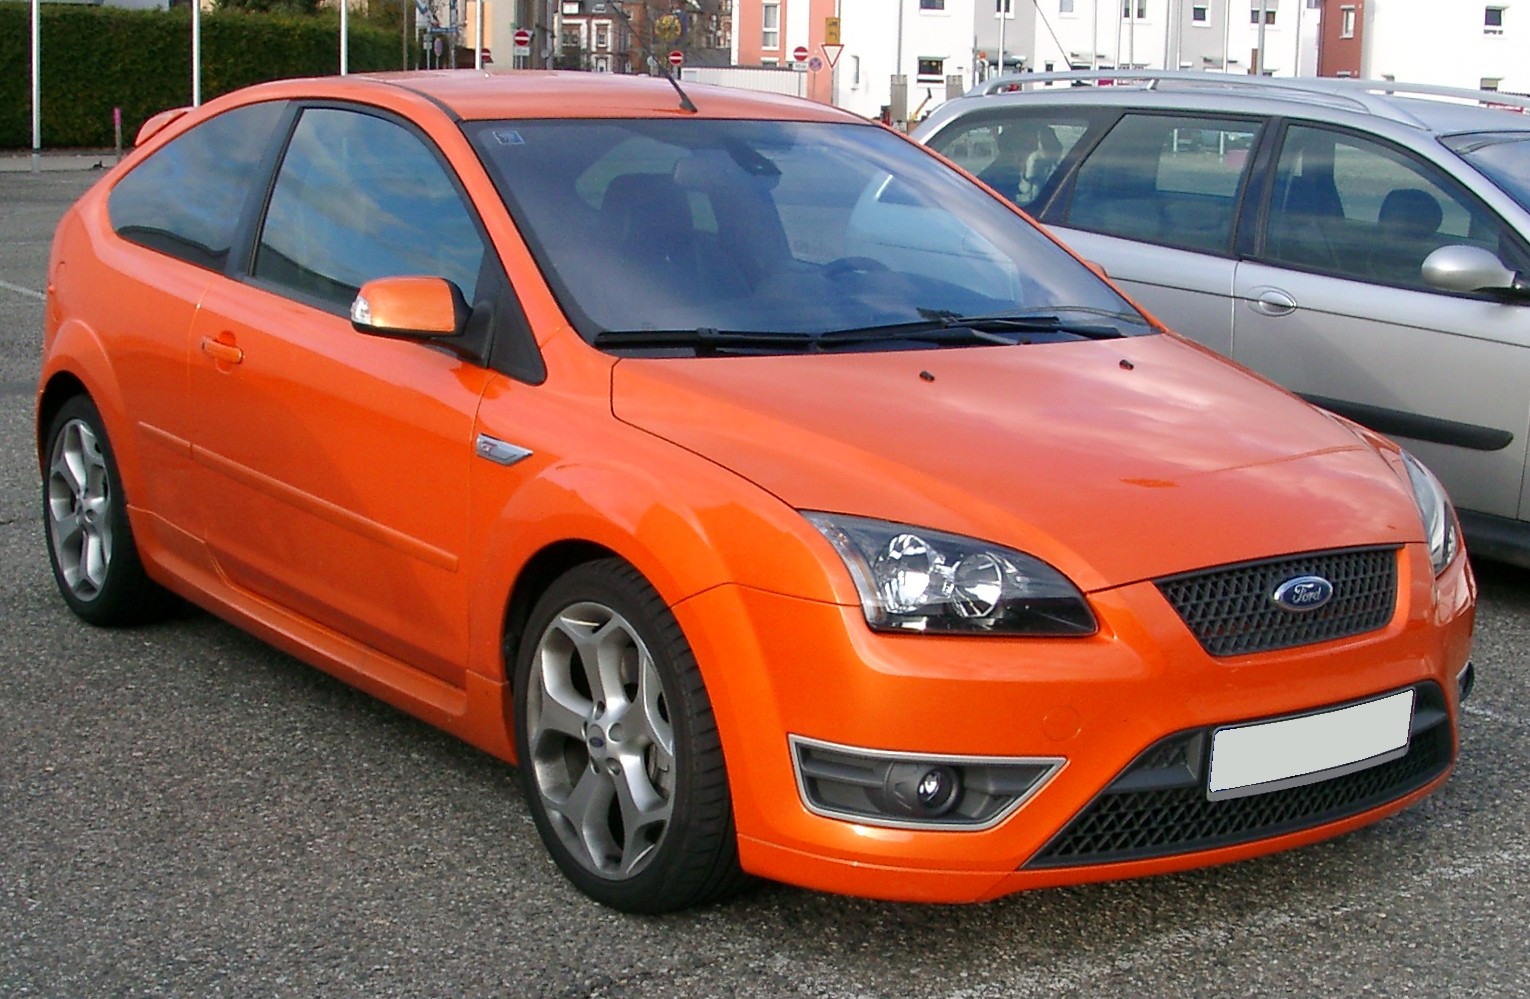 Ford_Focus_ST_front_20071112.jpg